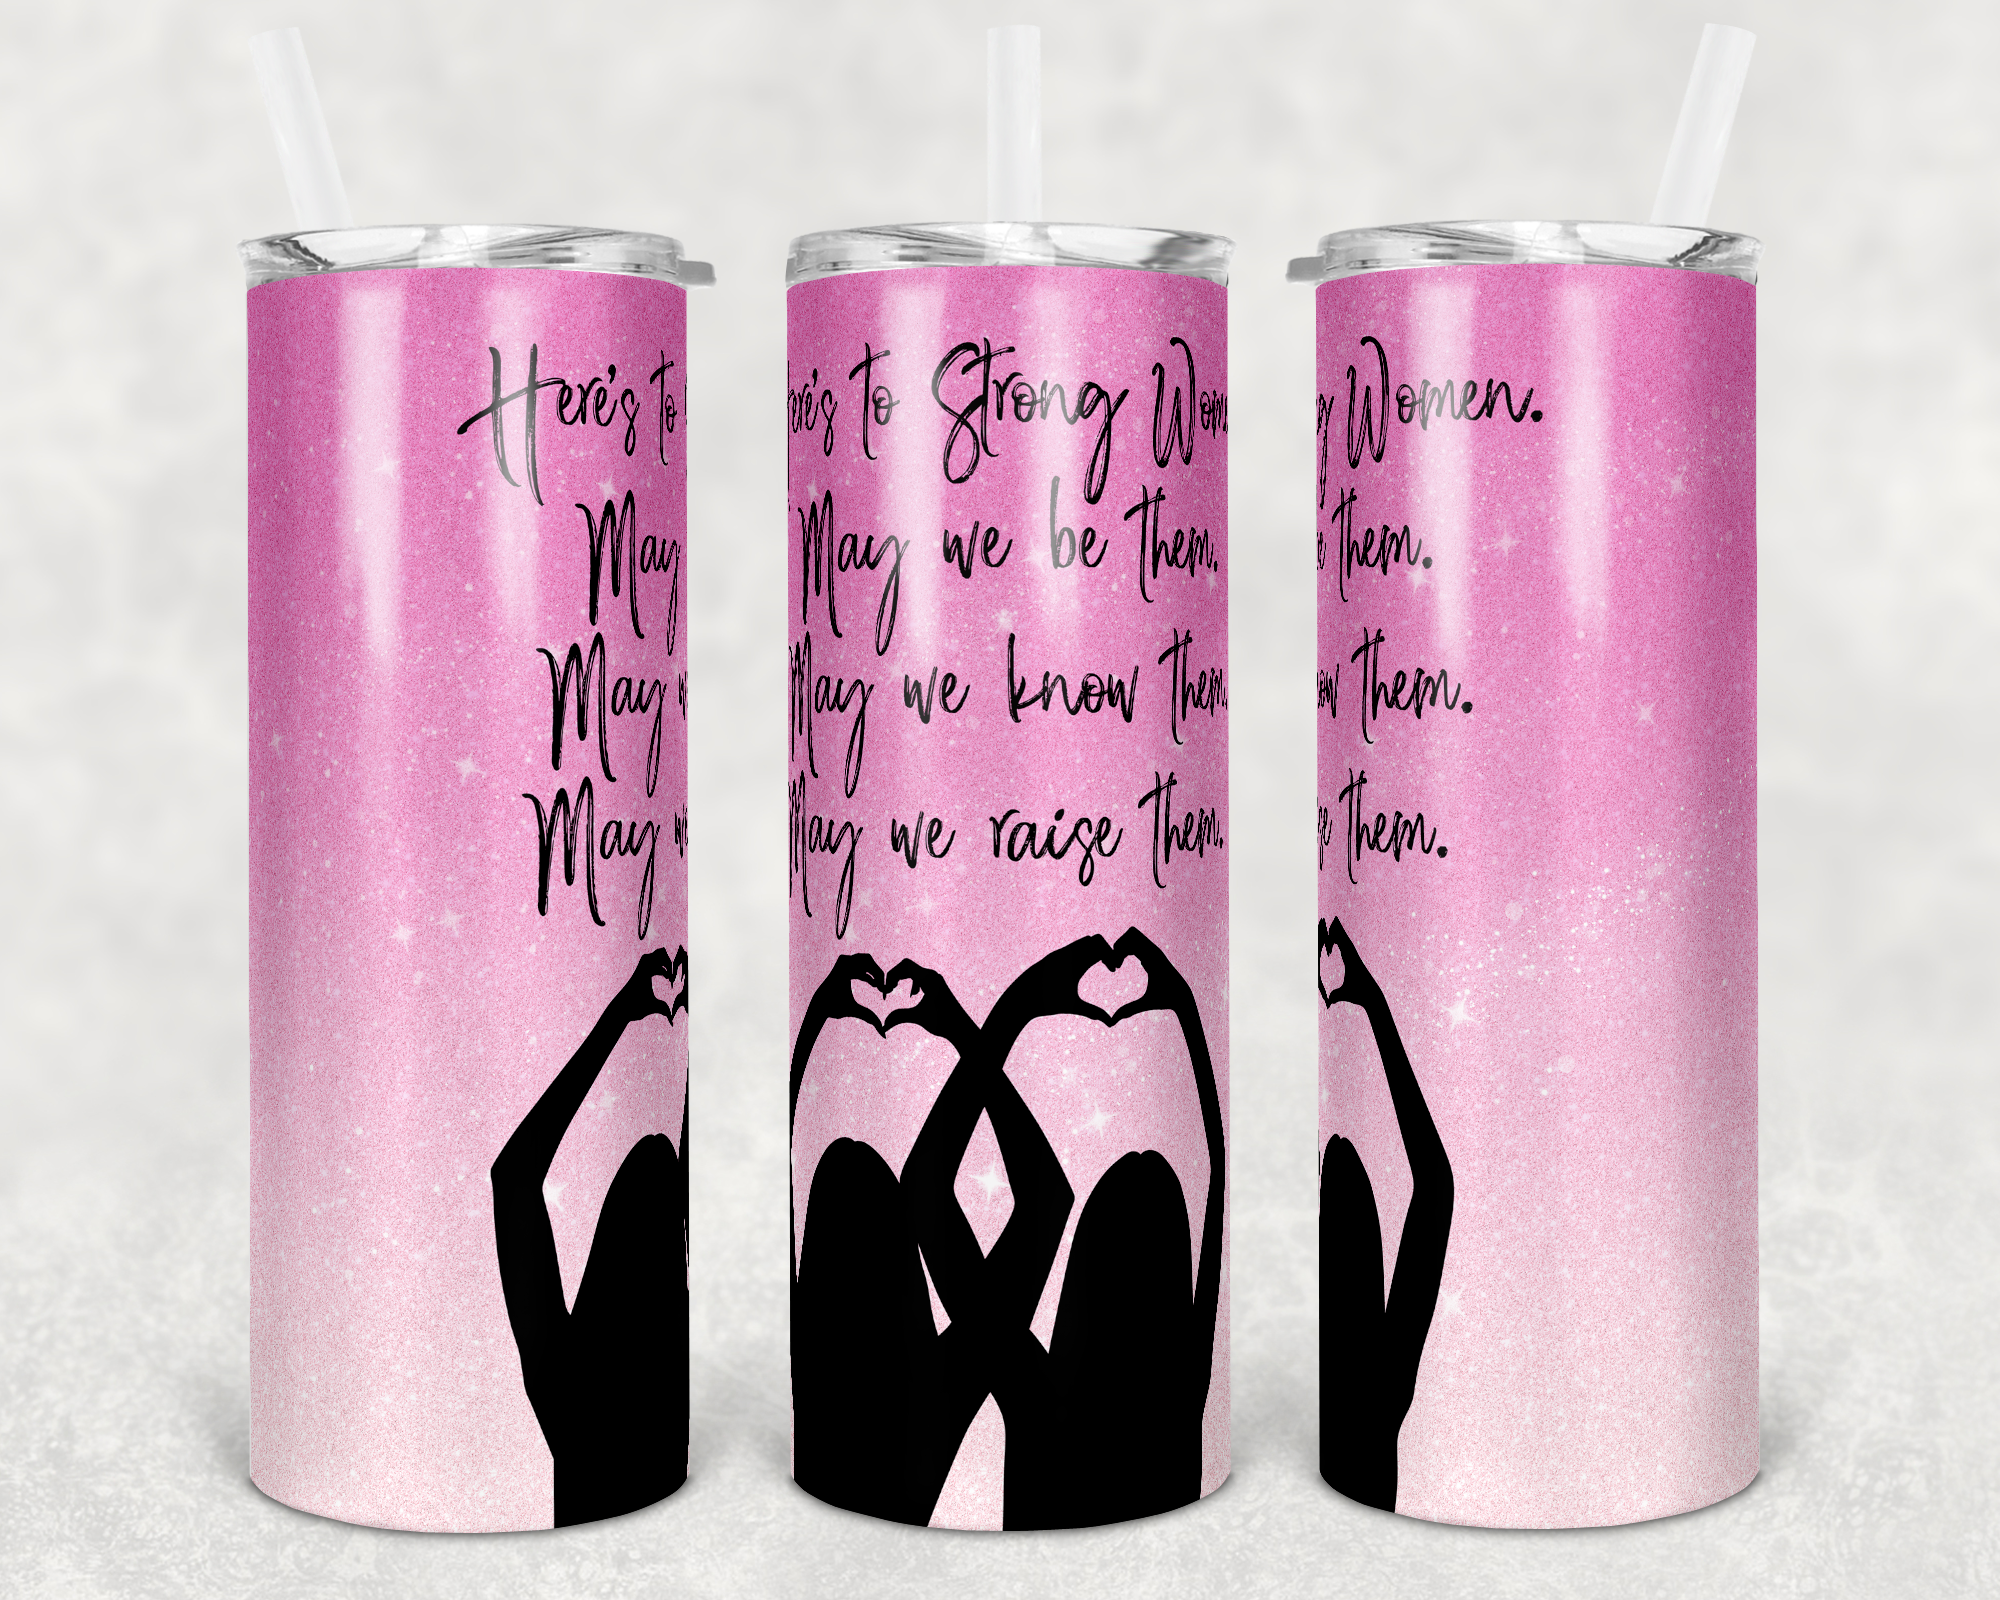 The "Strong Women" 20 oz Double Wall Stainless Steel Tumbler